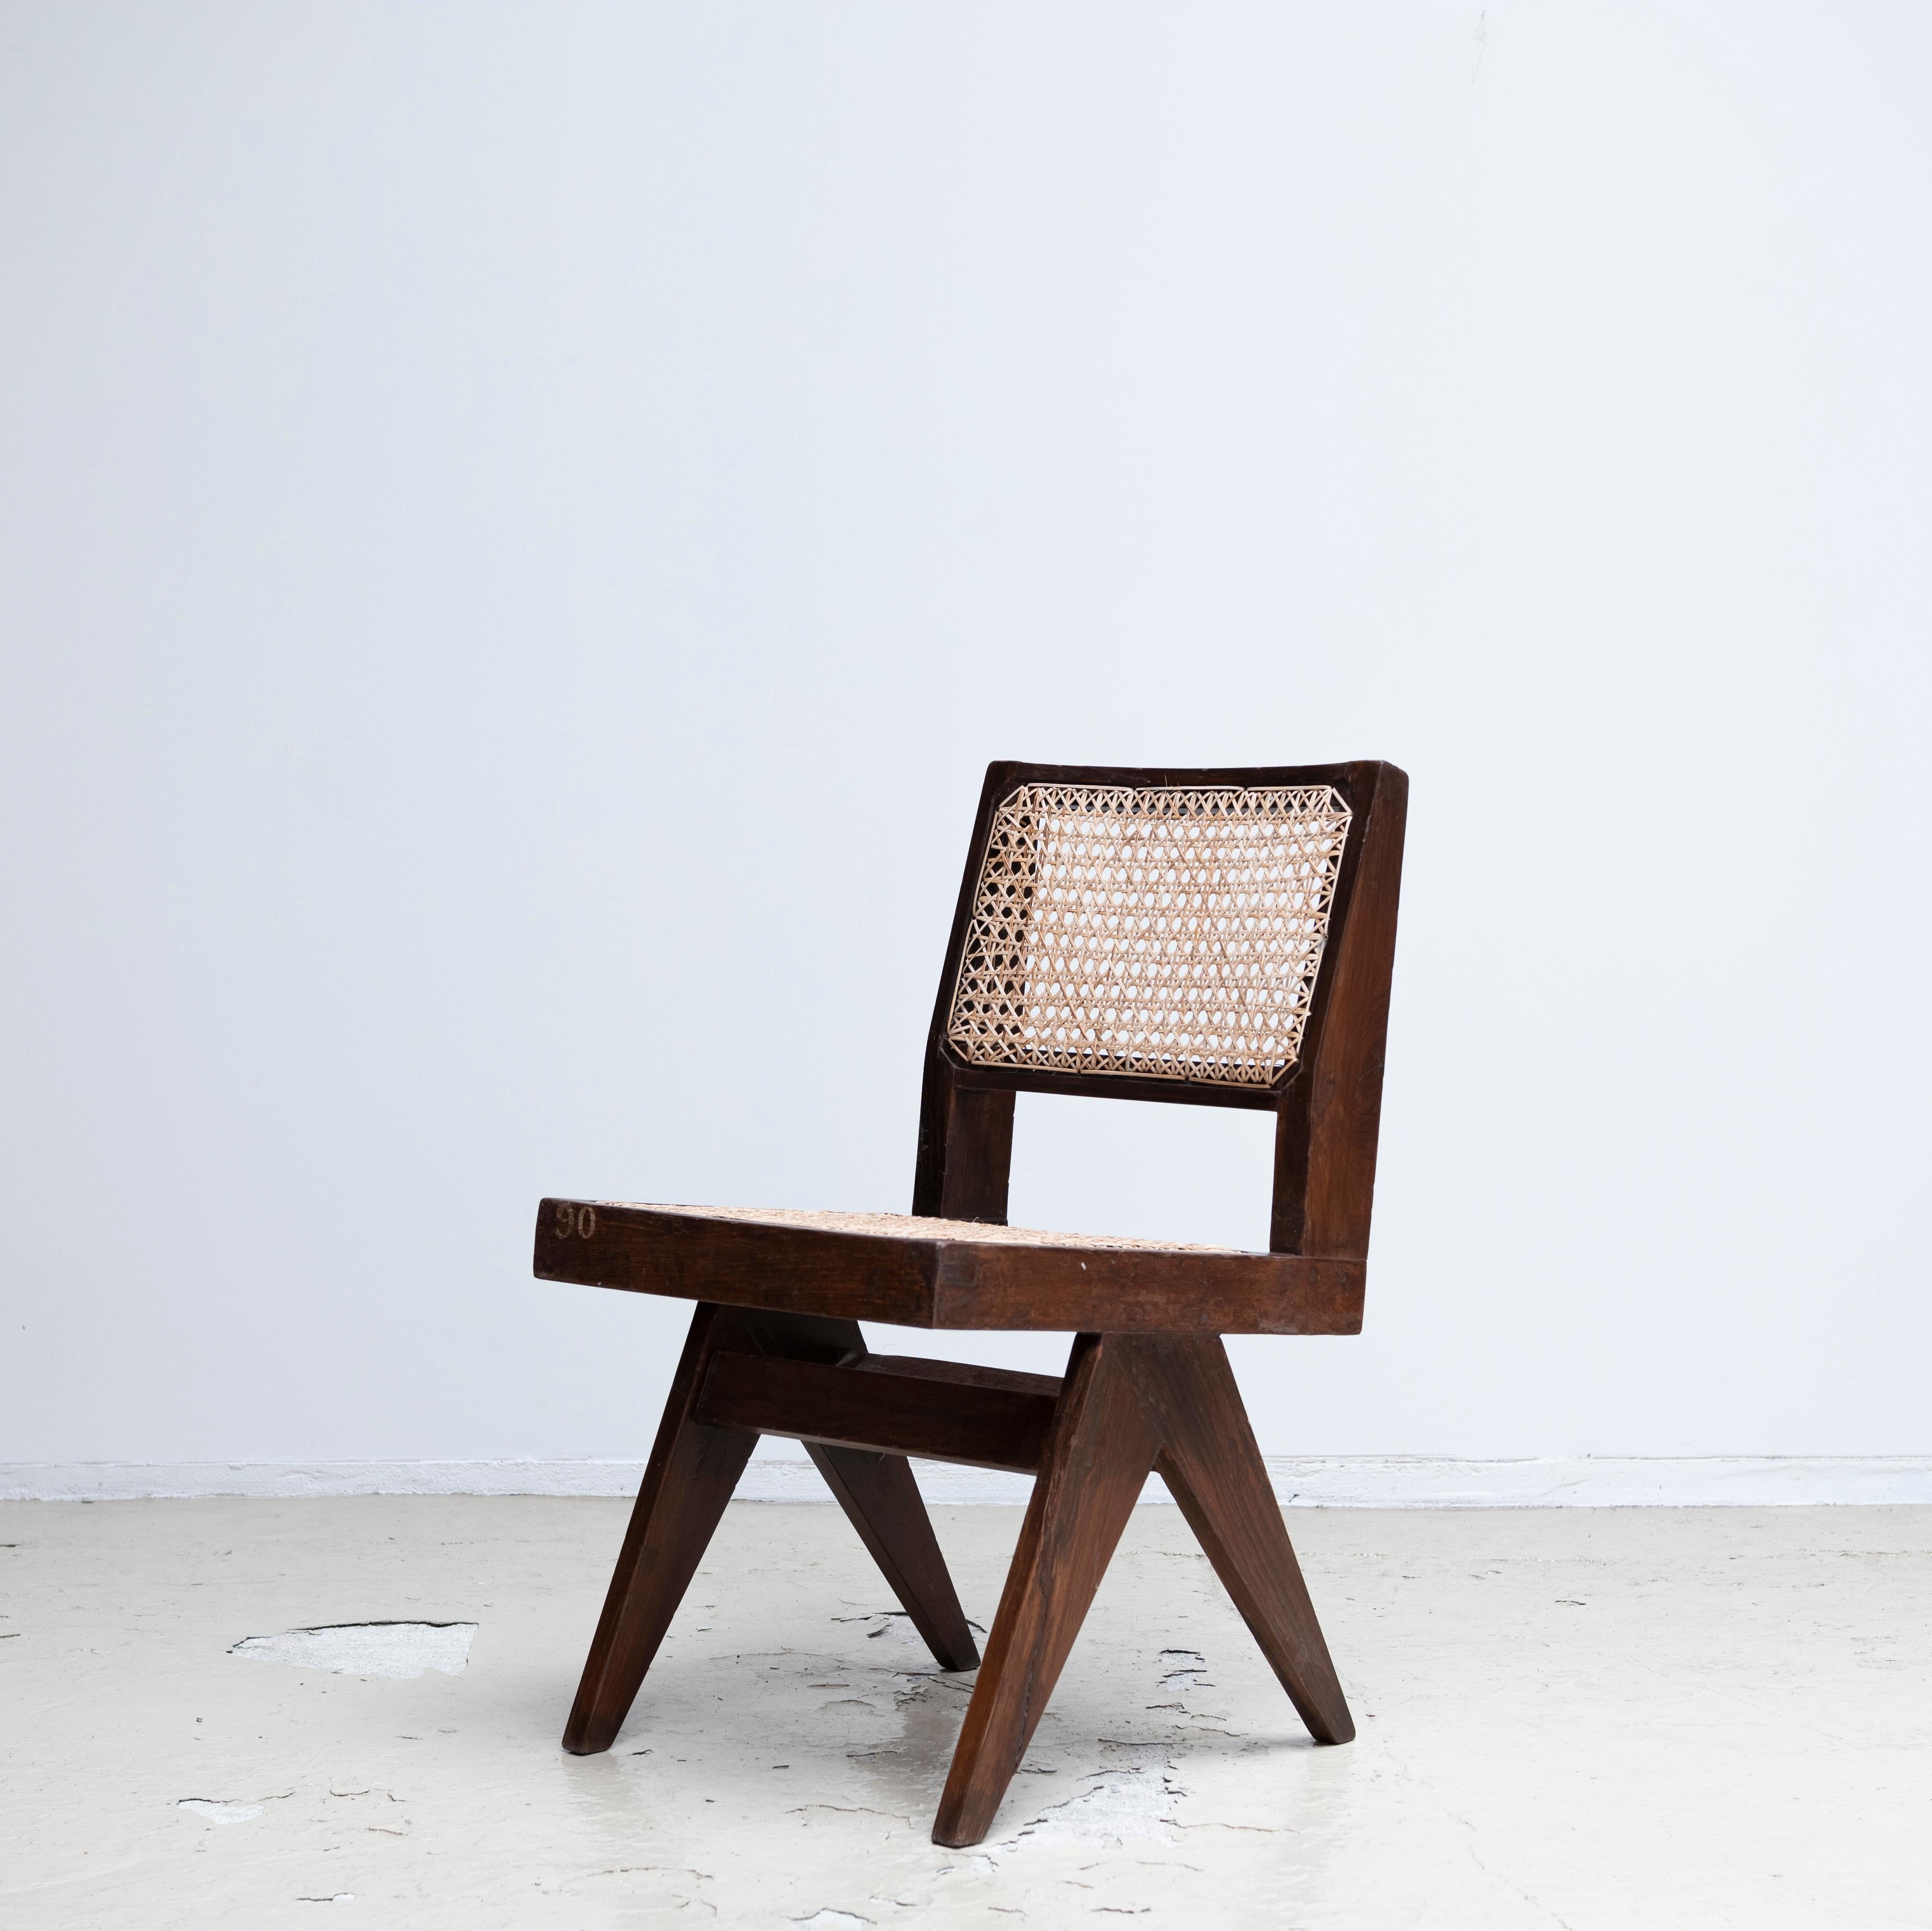 Pierre Jeanneret Armless Dining Chairs, Pair, circa 1950s, Chandigarh, India 2